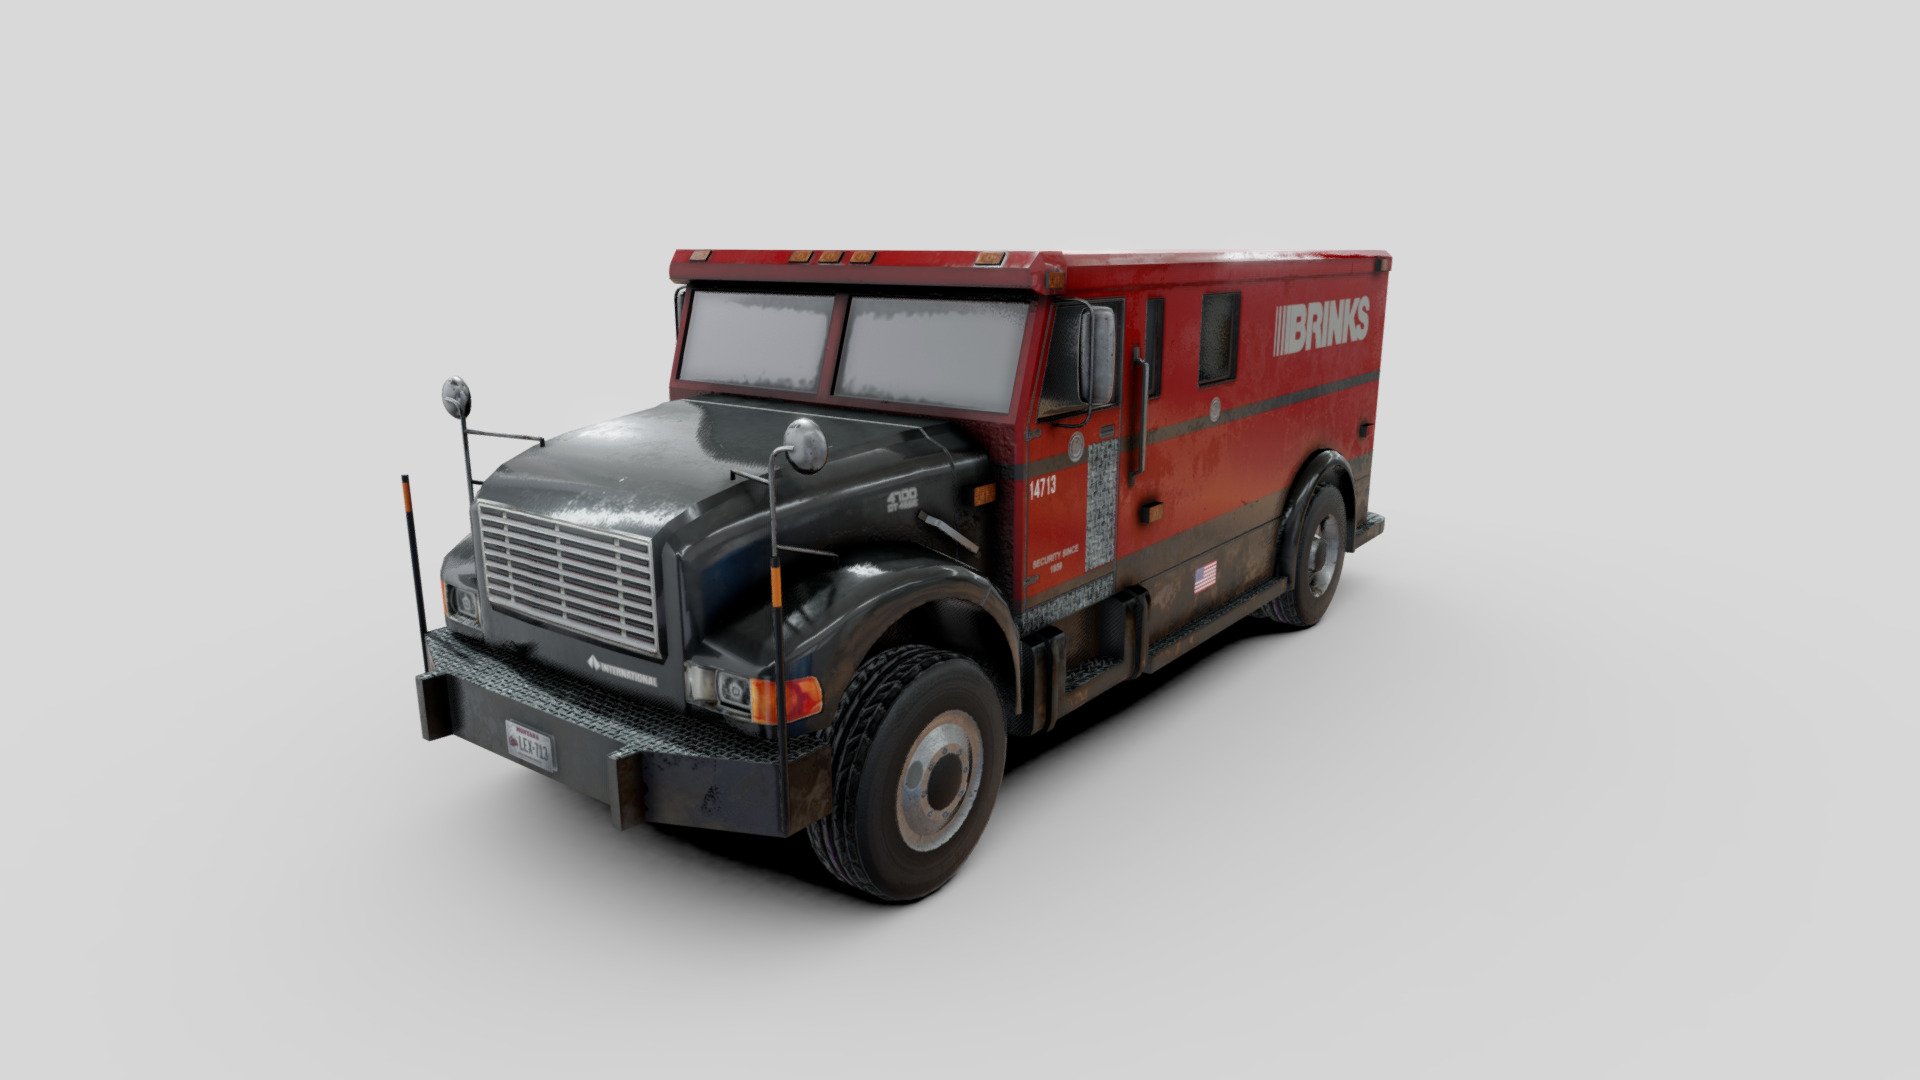 1995 model of International 4700 Armored Truck in Brinks livery 3d model